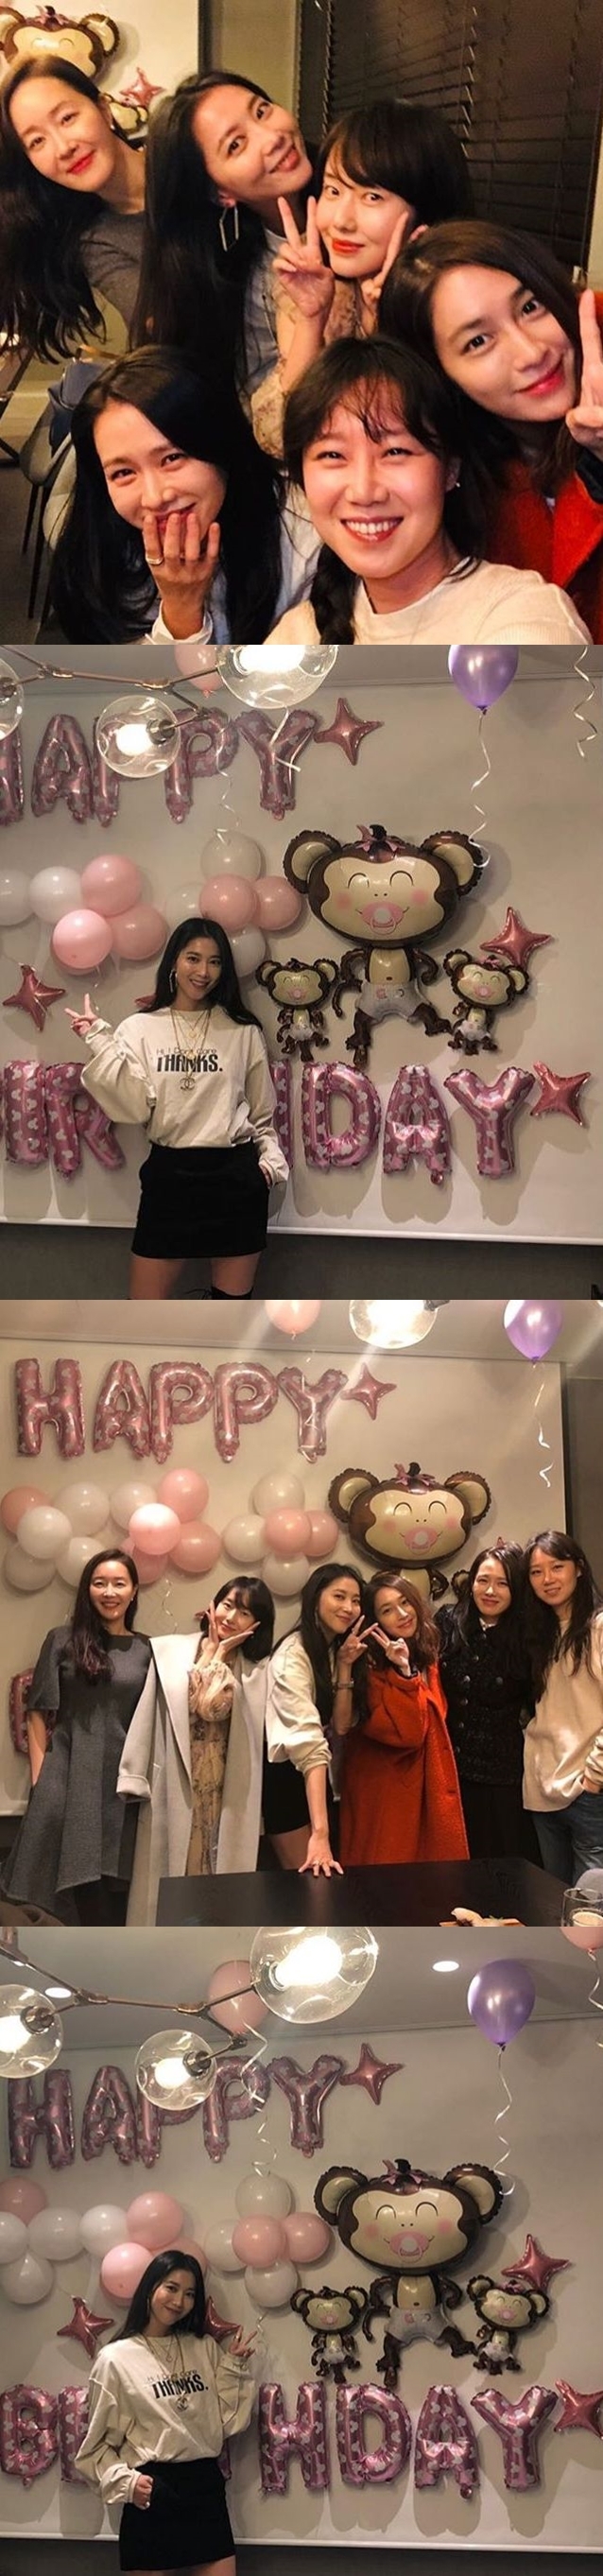 Seoul=) = Actor Oh Yoon-ah opened the Birthday Party with close associate Actors.Oh Yoon-ah posted several photos on her Instagram account on Tuesday with her birthday co-workers.The photo shows the birthday hero Oh Yoon-ah, Son Ye-jin Gong Hyo-jin Lee Min-jung Lee Jung-hyun Um Ji-won.They are all having a happy time with a bright smile.In particular, Oh Yoon-ah draws Eye-catching with a smile on his finger in front of a wall decorated with balloons.On the other hand, Oh Yoon-ah will appear on MBCs new weekend drama Promise with God ahead of the first broadcast on the 24th.MBC Real Man 300, which is broadcasted every Friday at 9:55 pm, is also appearing.